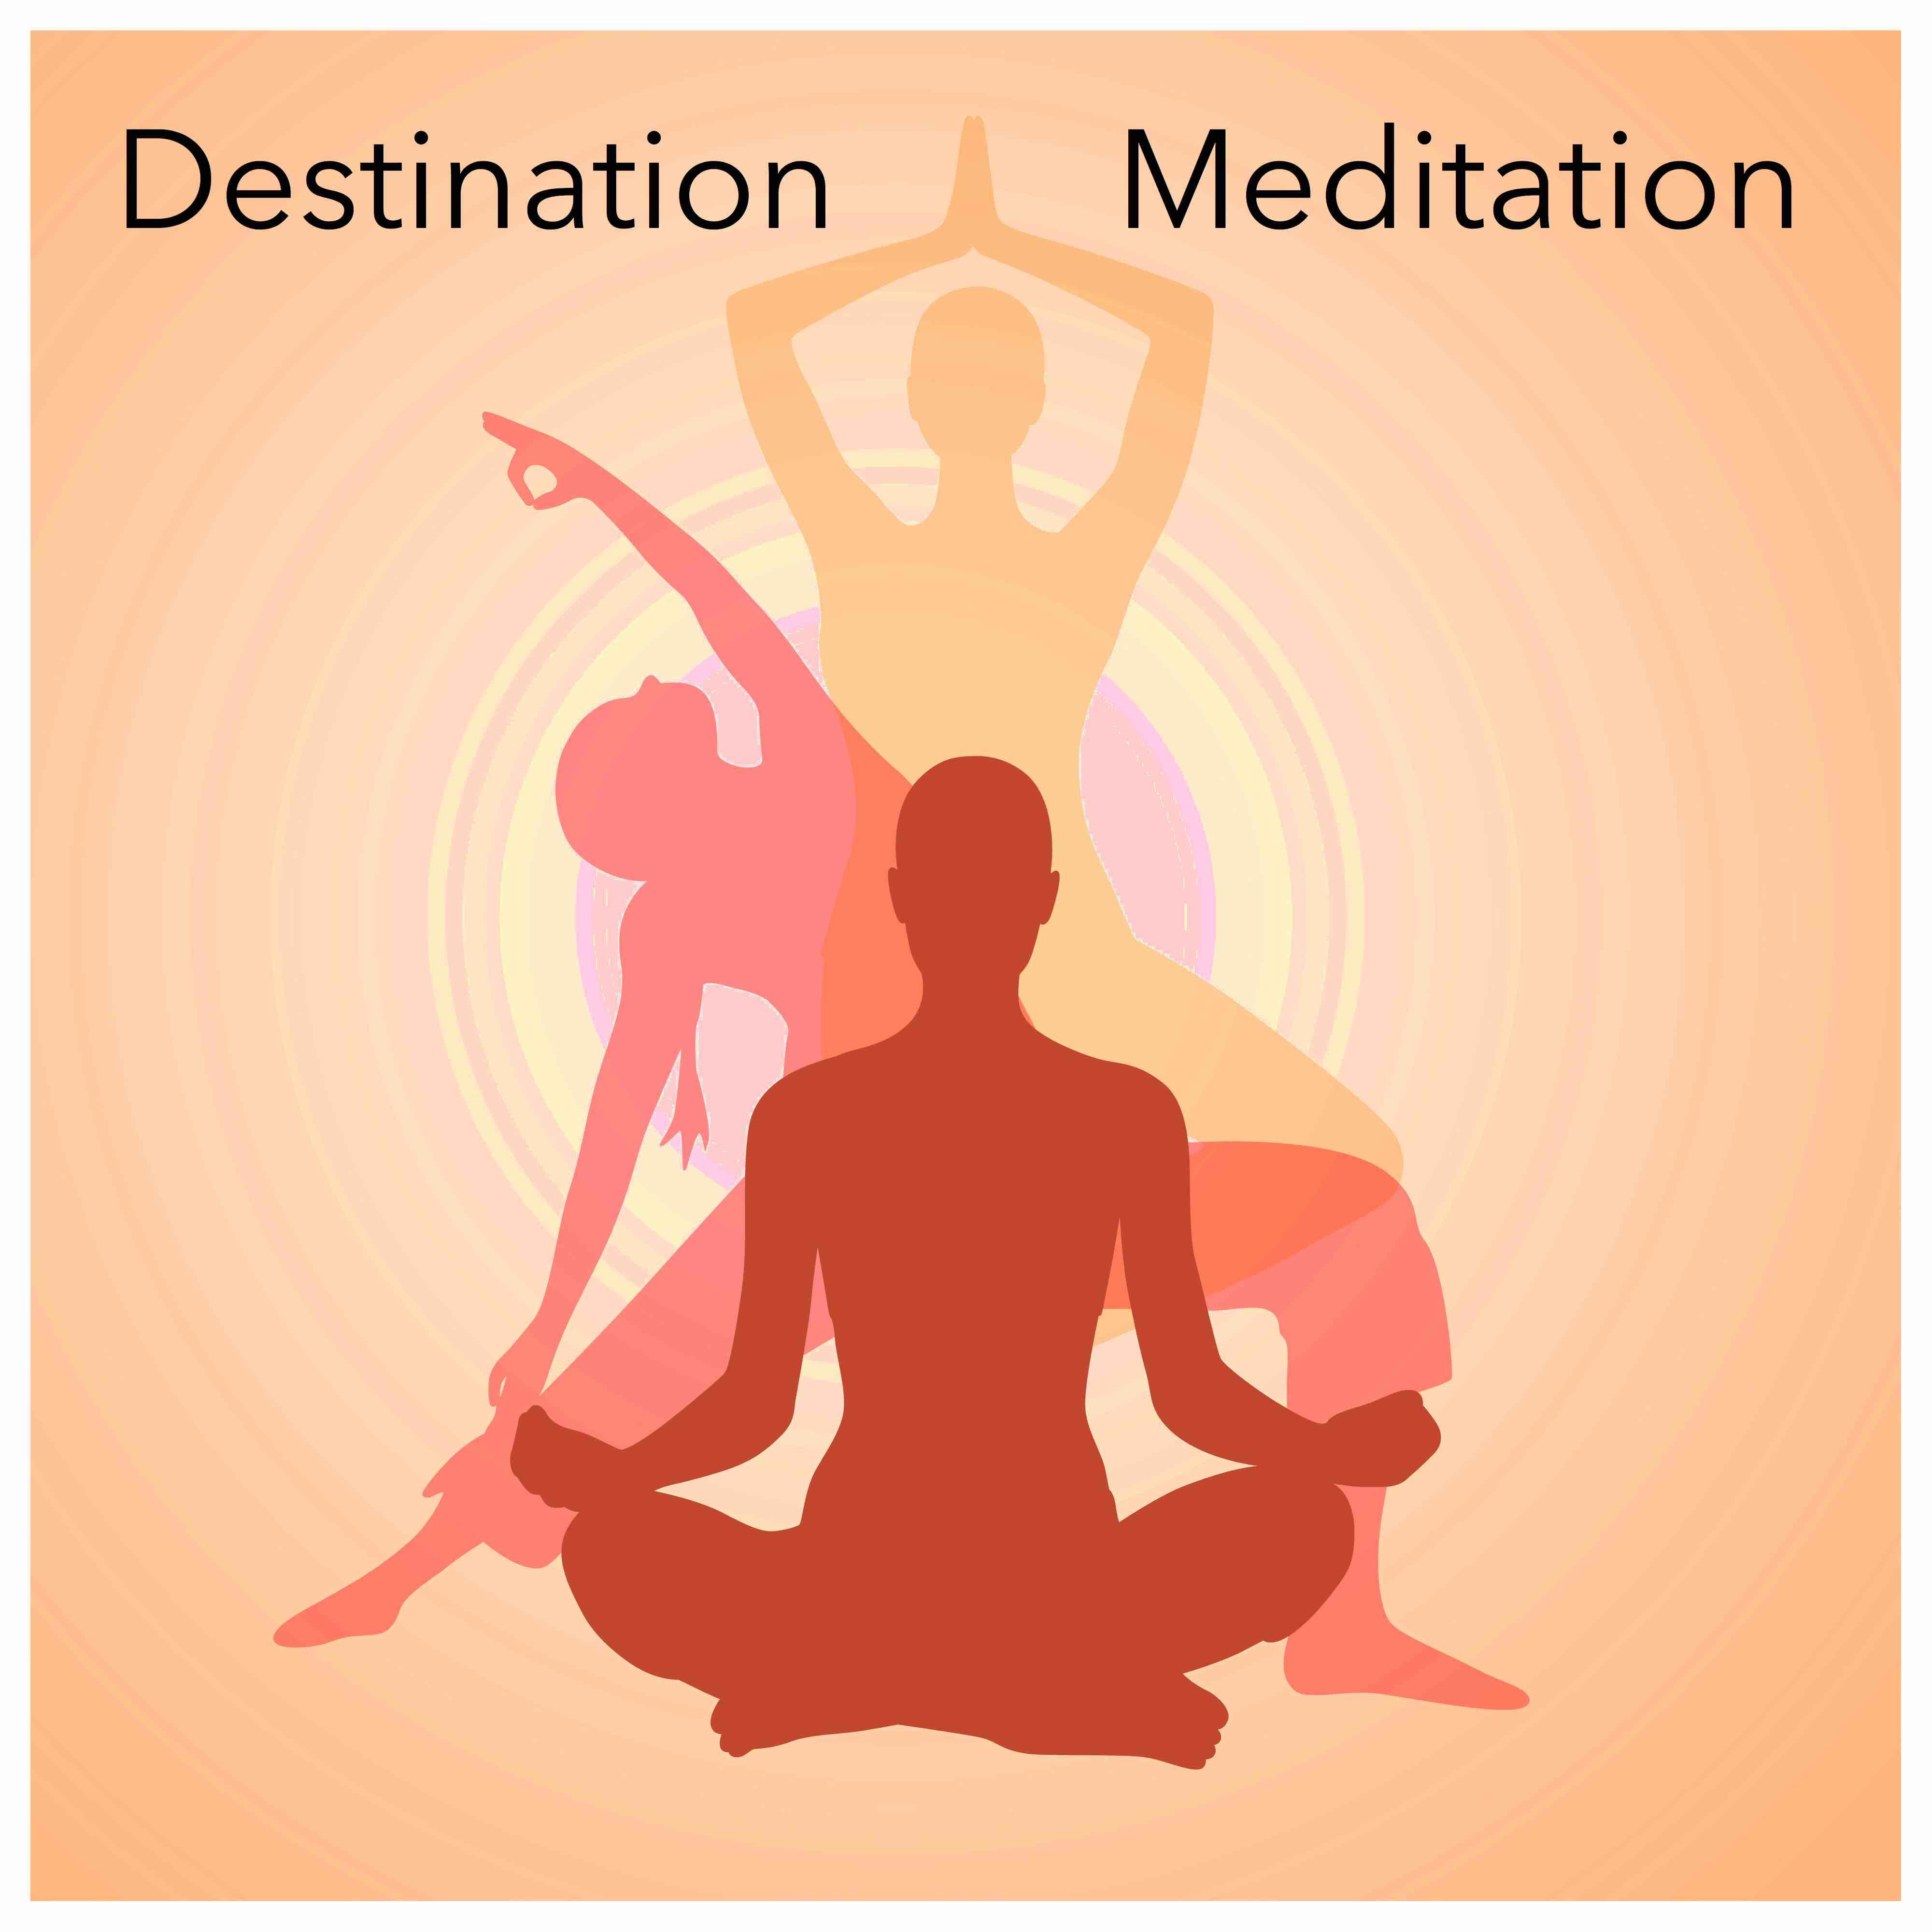 Destination Meditation - Hypnotic Music with Piano, Sounds of Nature and White Noise for Lucid Dreams, Yoga, Pilates, Tai Chi, Reiki